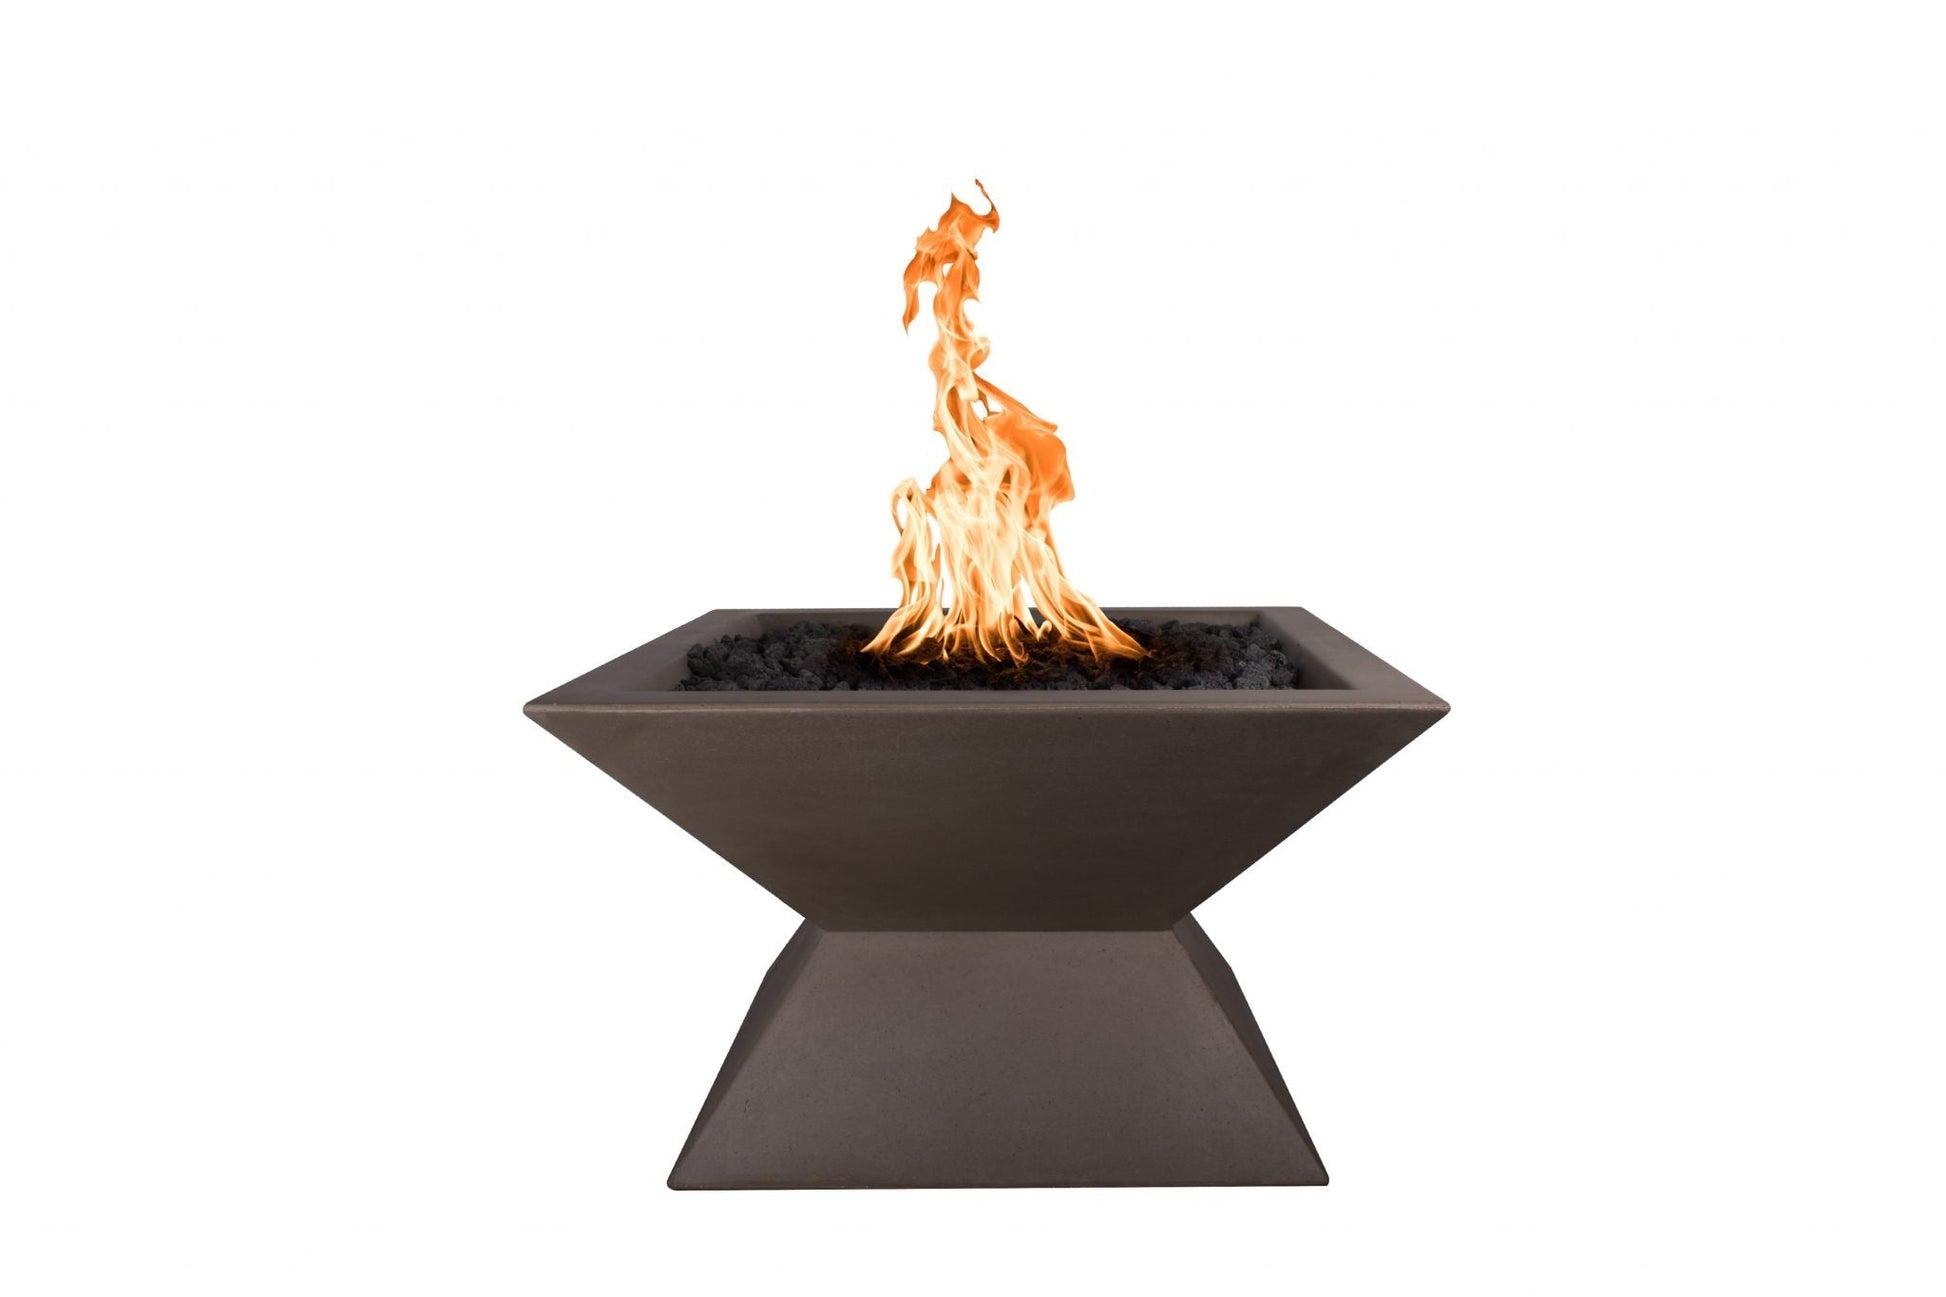 The Outdoor Plus Square Uxmal 30" Ash GFRC Concrete Natural Gas Fire Pit with 12V Electronic Ignition